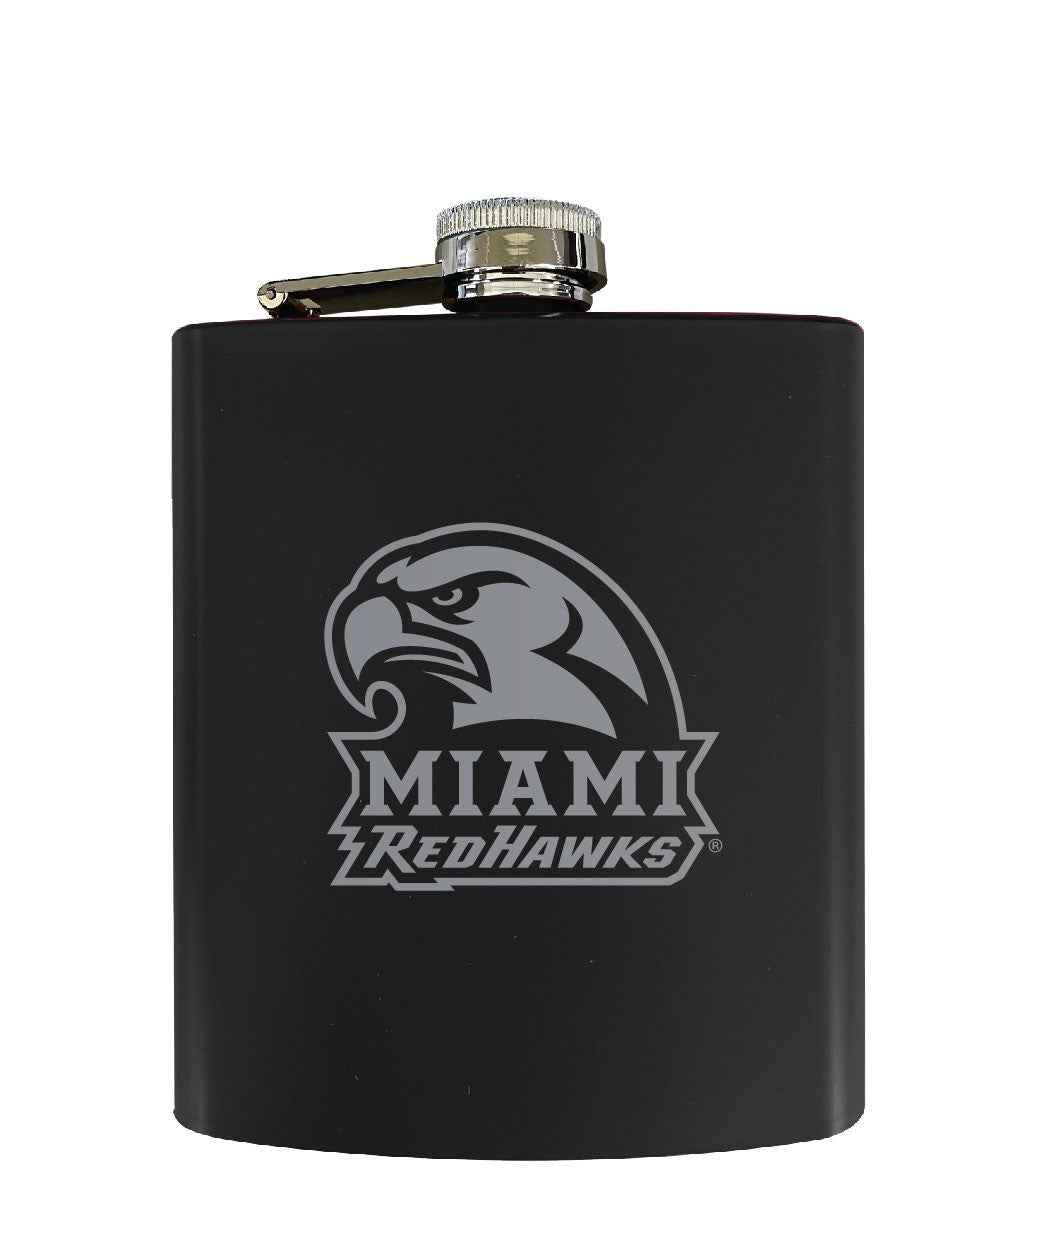 Miami of Ohio Stainless Steel Etched Flask - Choose Your Color